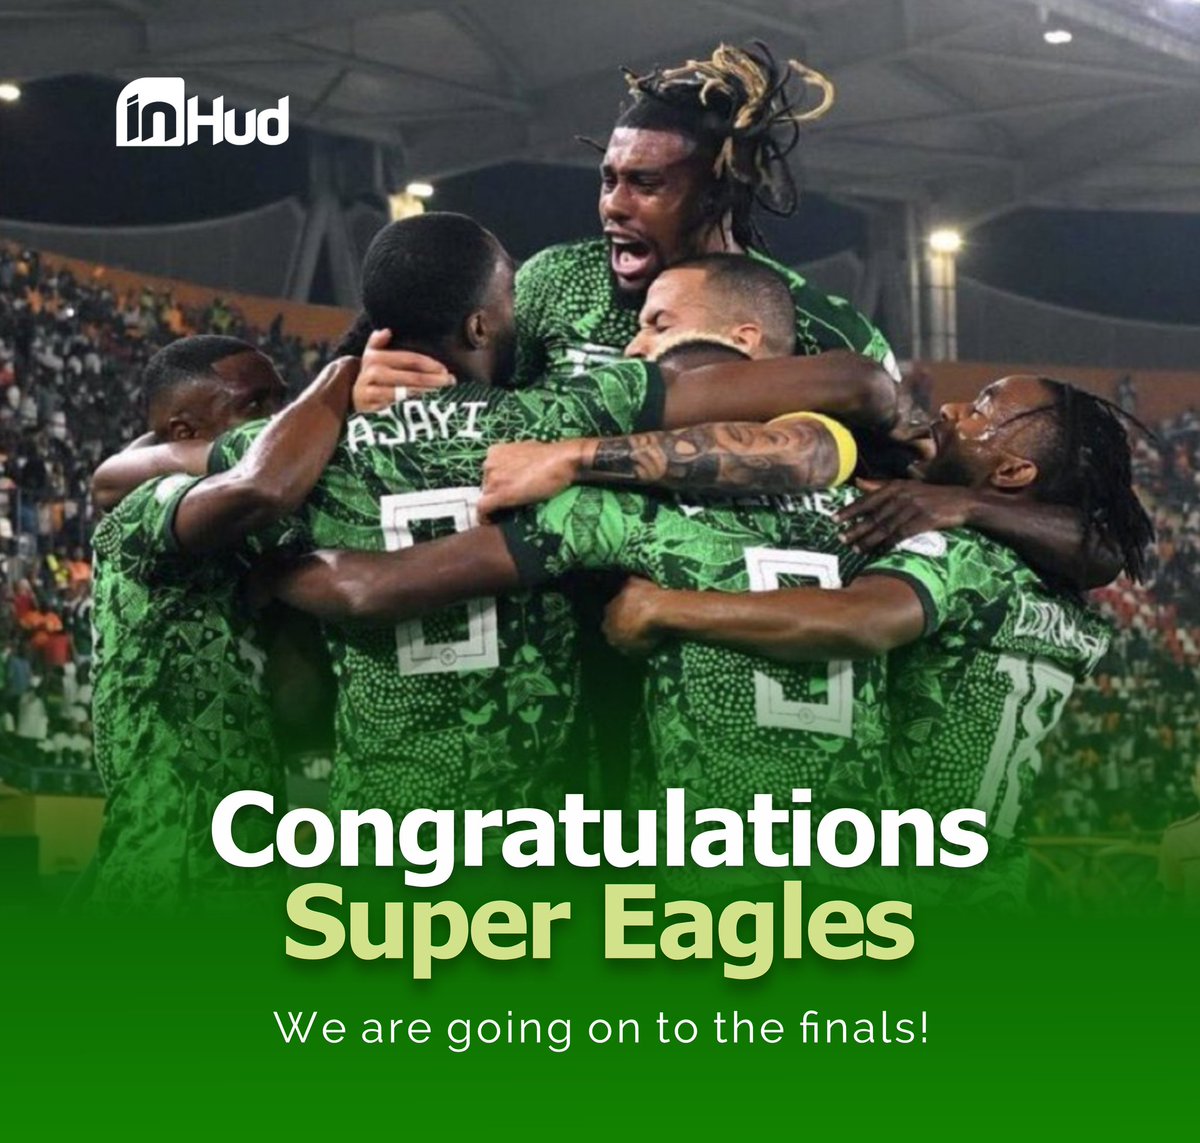 Yesterday Nigeria fought hard and won big in the semi-finals. 🔥

We are rooting for the team in the finals!

What are your predictions for the match? Let us know in the comments. 🤓

#afcon #afcon2023 #nigeriafootball #inHud